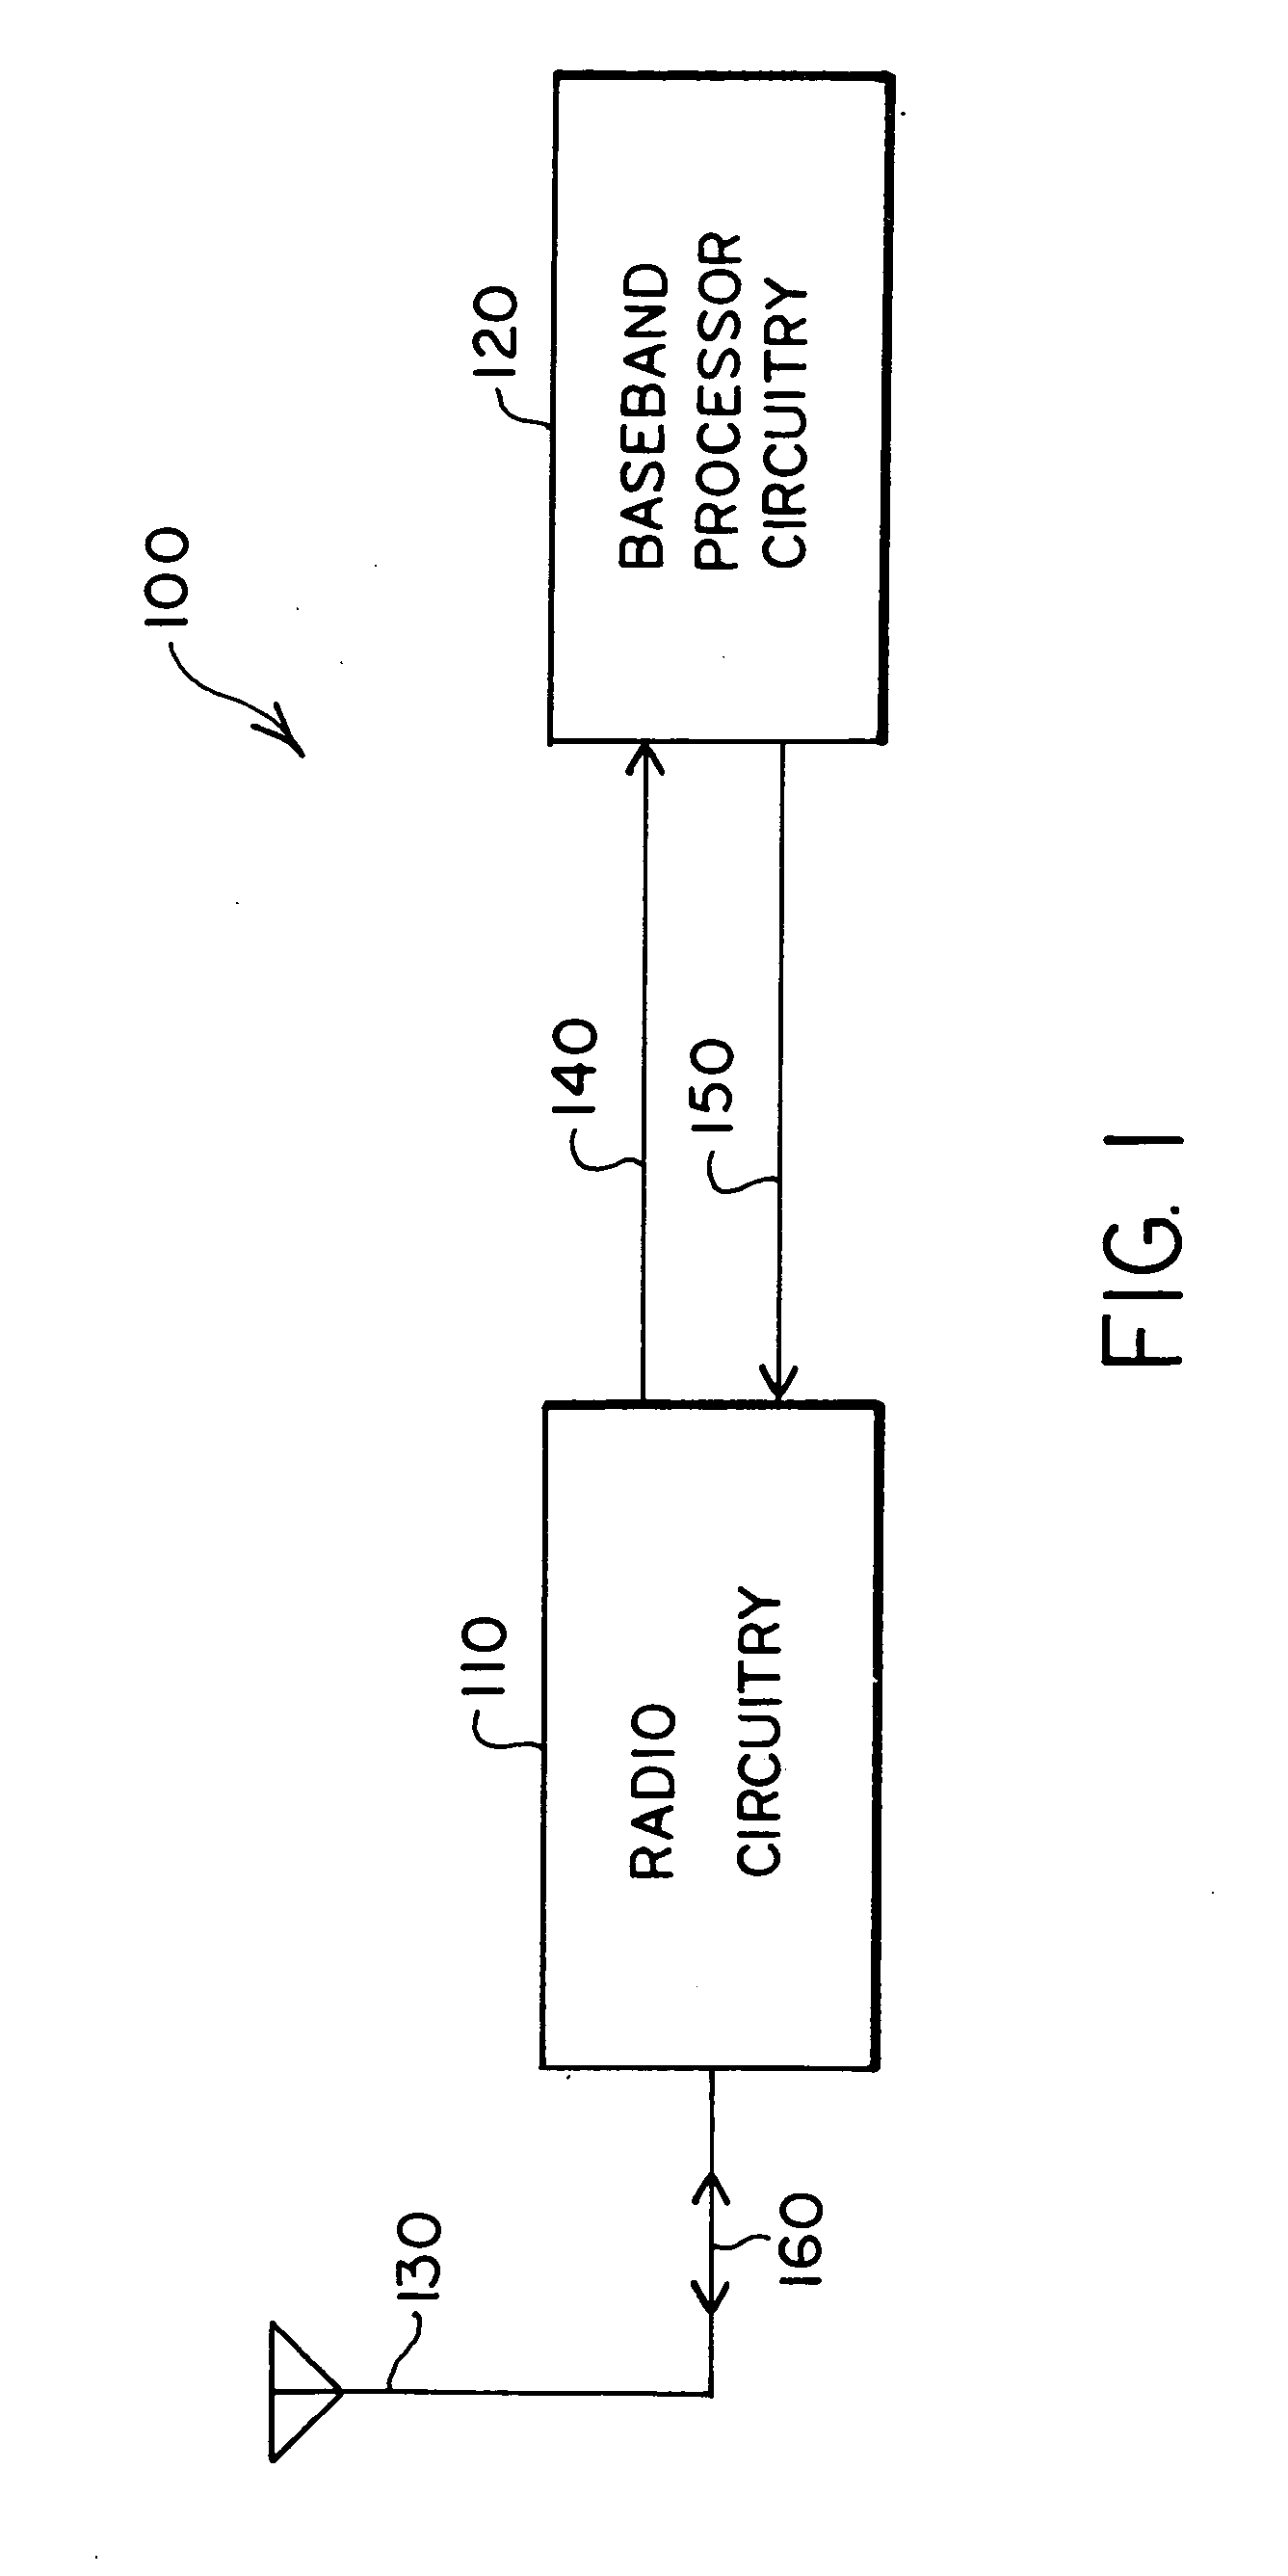 Partitioning of radio-frequency apparatus